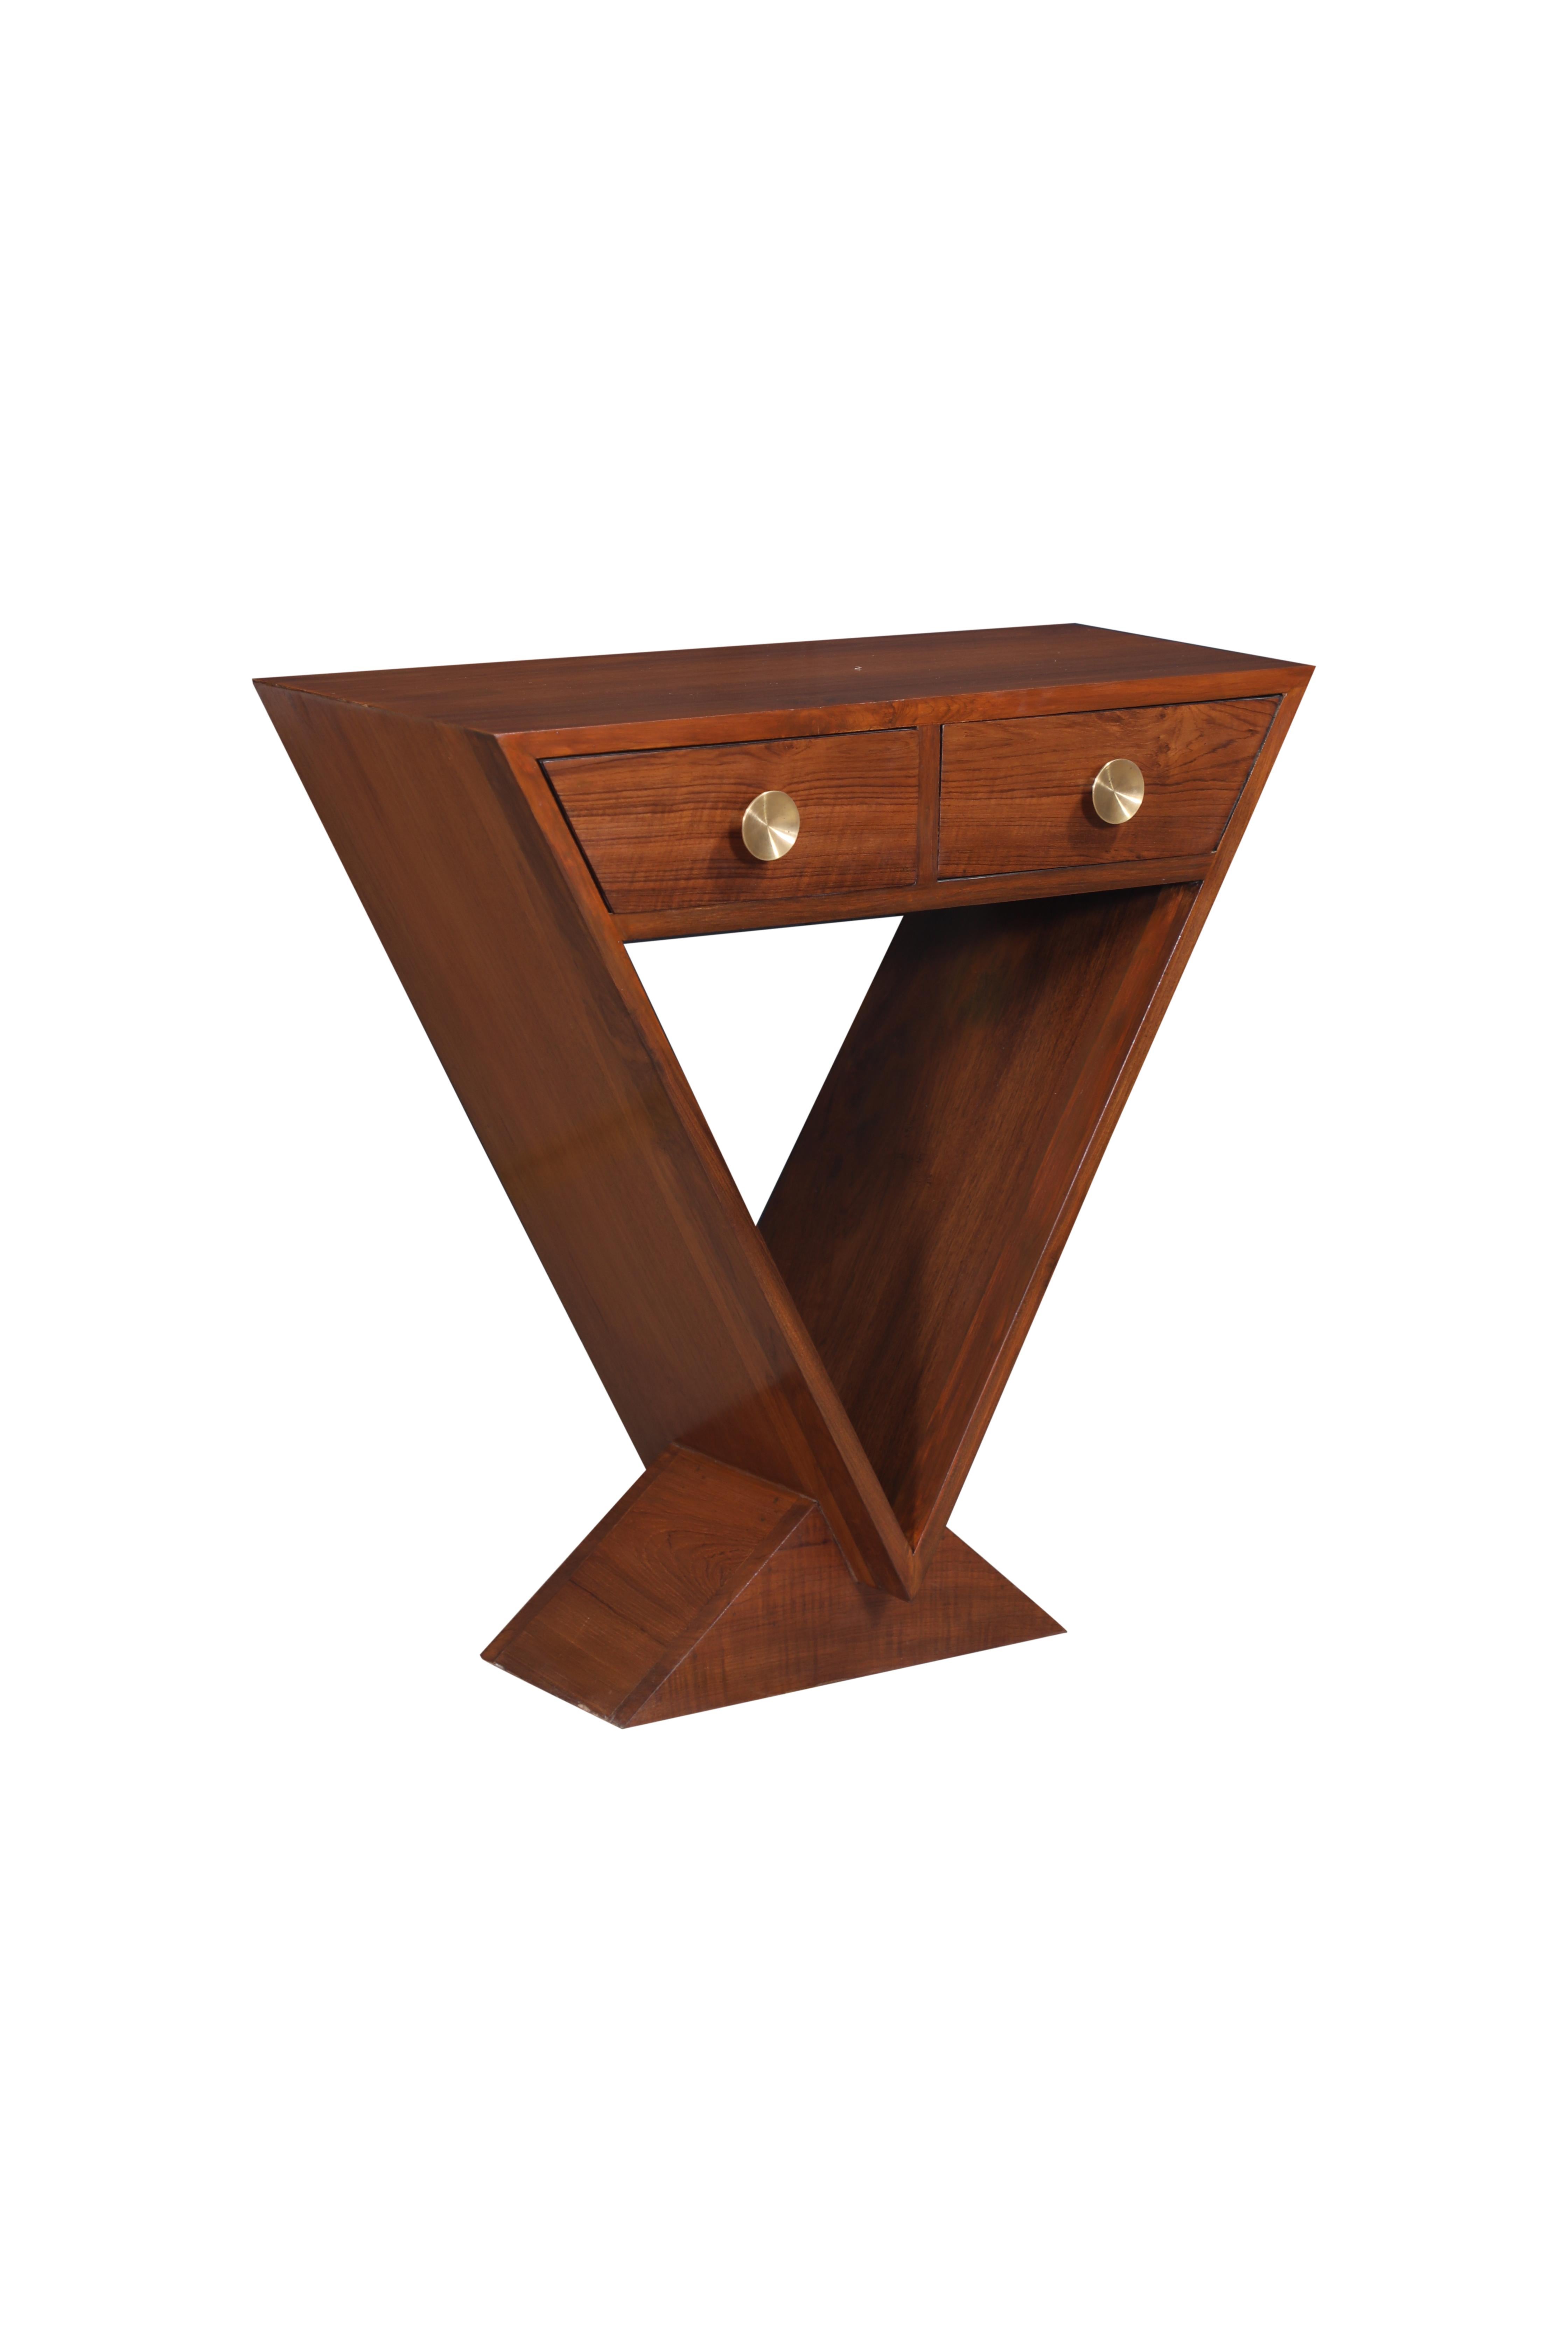 A Mid-Century Modern teak angled triangular side table with two front drawers.  Brass drawer pulls.  Great style and design.  Circa 1970's.

The Lockhart Collection is a personally curated gallery of antiques and fine jewelry, owned and operated by